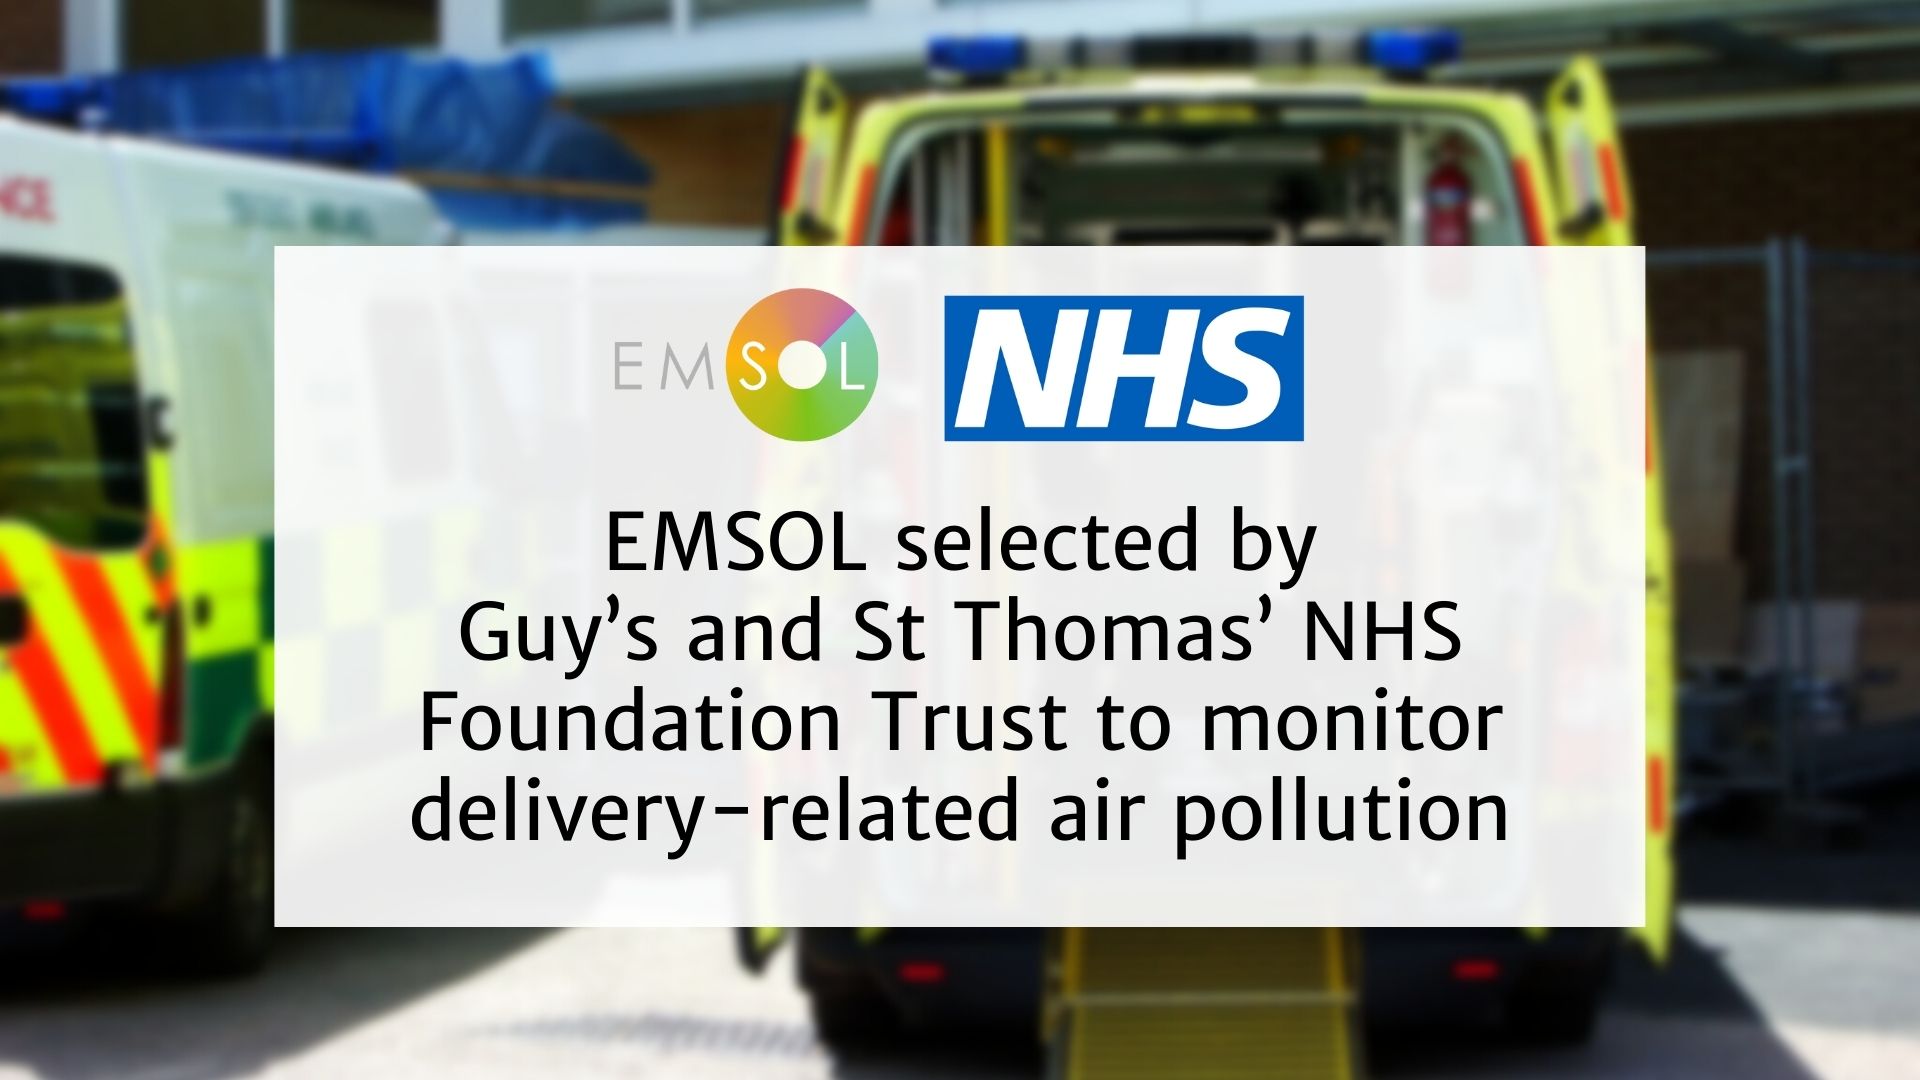 NEWS: EMSOL selected by Guy’s and St Thomas’ NHS Foundation Trust as part of the TfL Freight Lab trials to monitor delivery-related air pollution